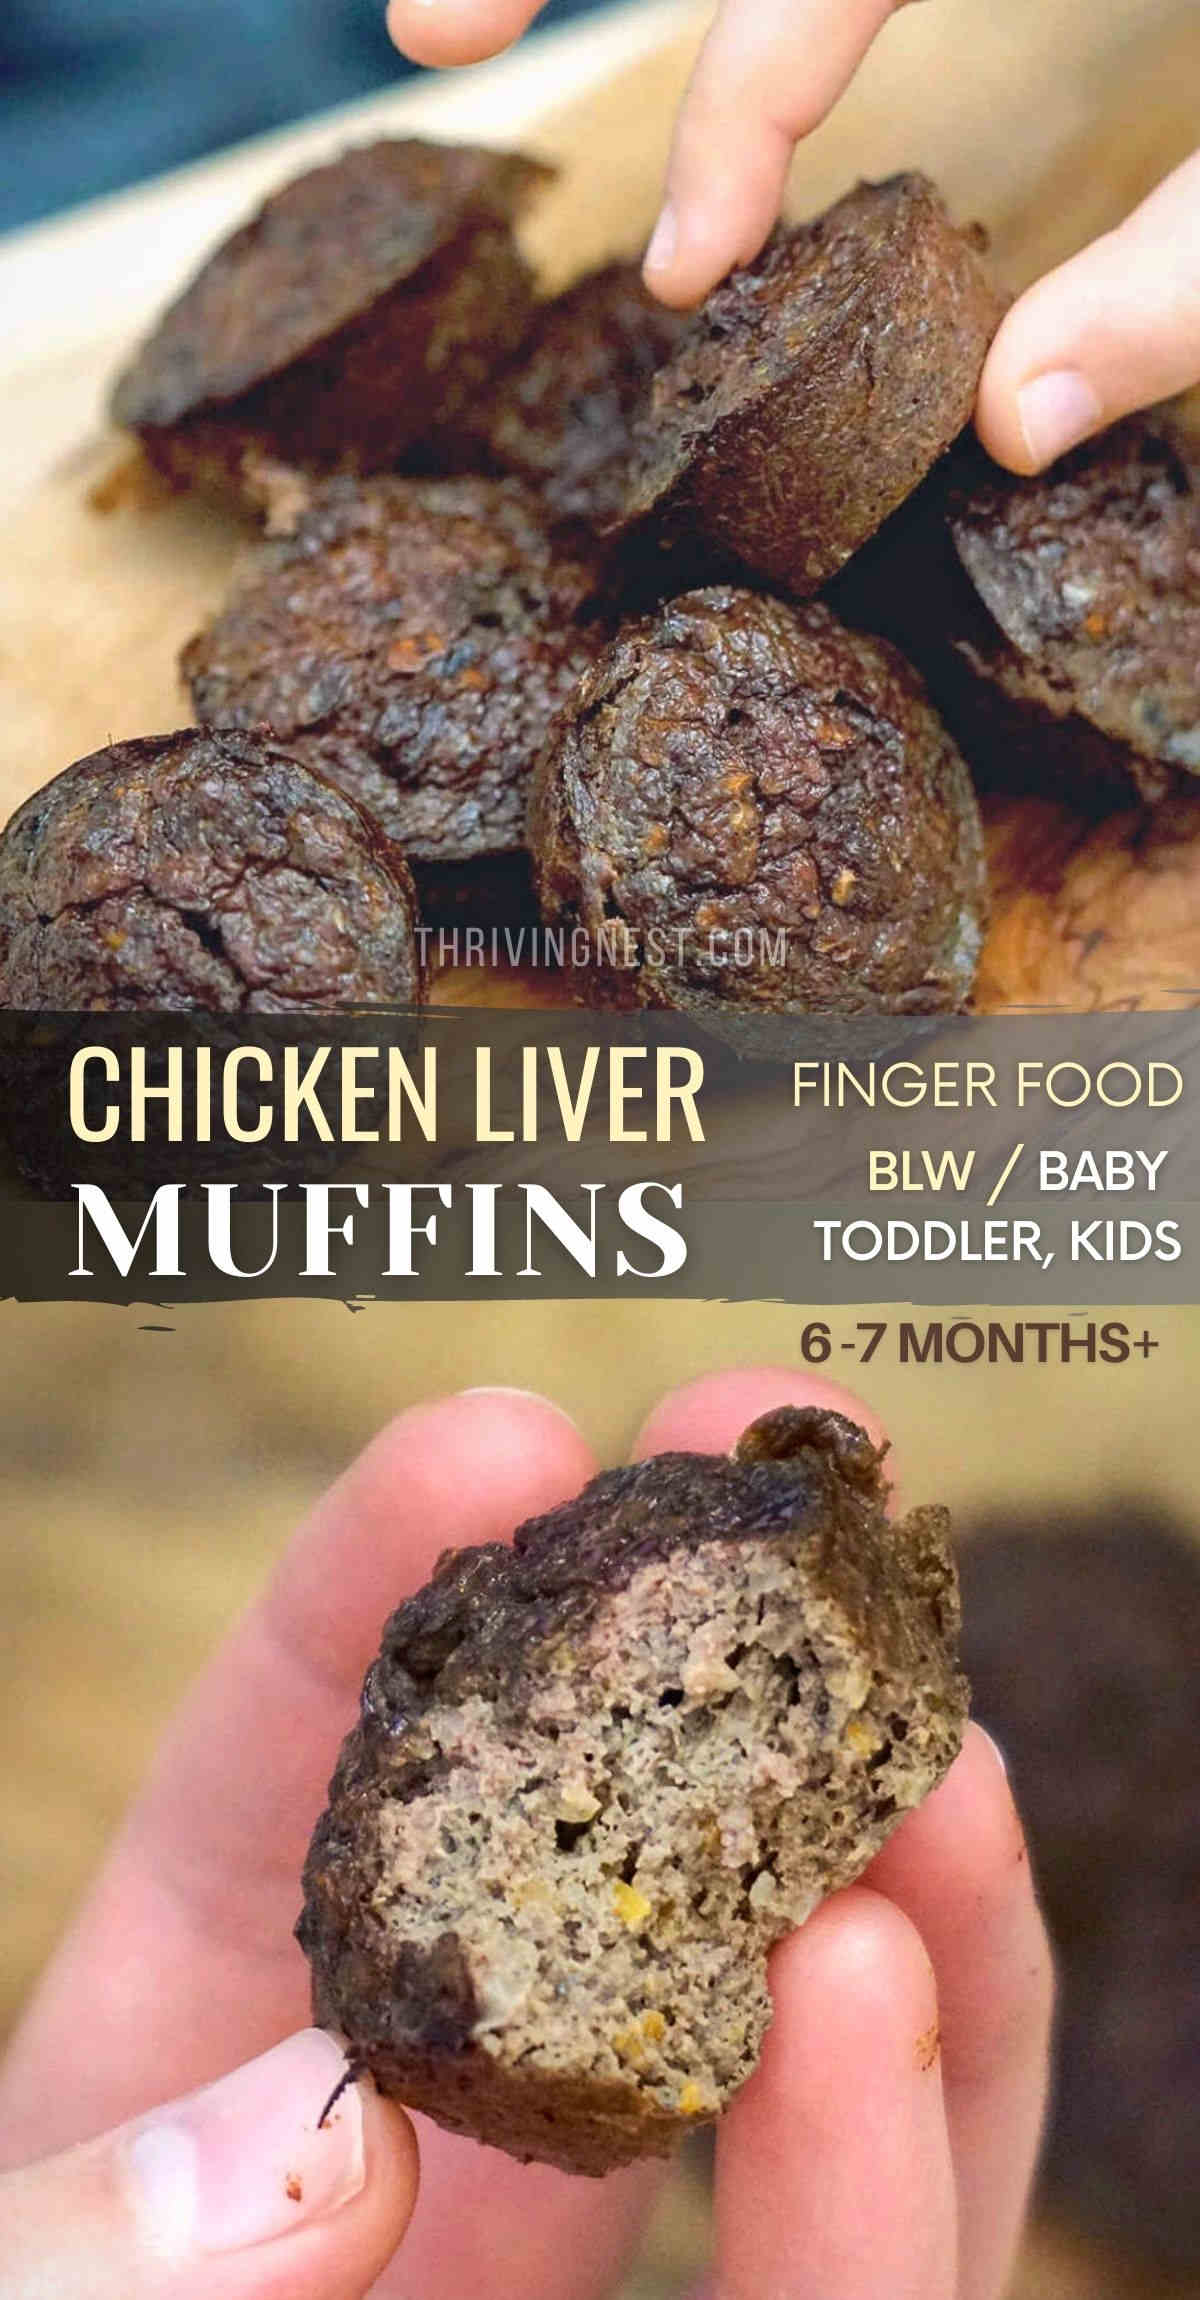 This chicken liver muffin recipe is a great way to incorporate chicken liver / organ meat into baby food (GAPS friendly). The mini muffins are soft and tender providing natural supplementation of Iron, Vitamins A and B’s (including B12). Serve these liver muffins for babies starting 6 months and up / toddlers - perfect as finger food when doing baby led weaning or served as a side with a meal. Or simply make liver puree and mix in other baby food. #chickenlivers #babyfood #gaps #blw #fingerfood